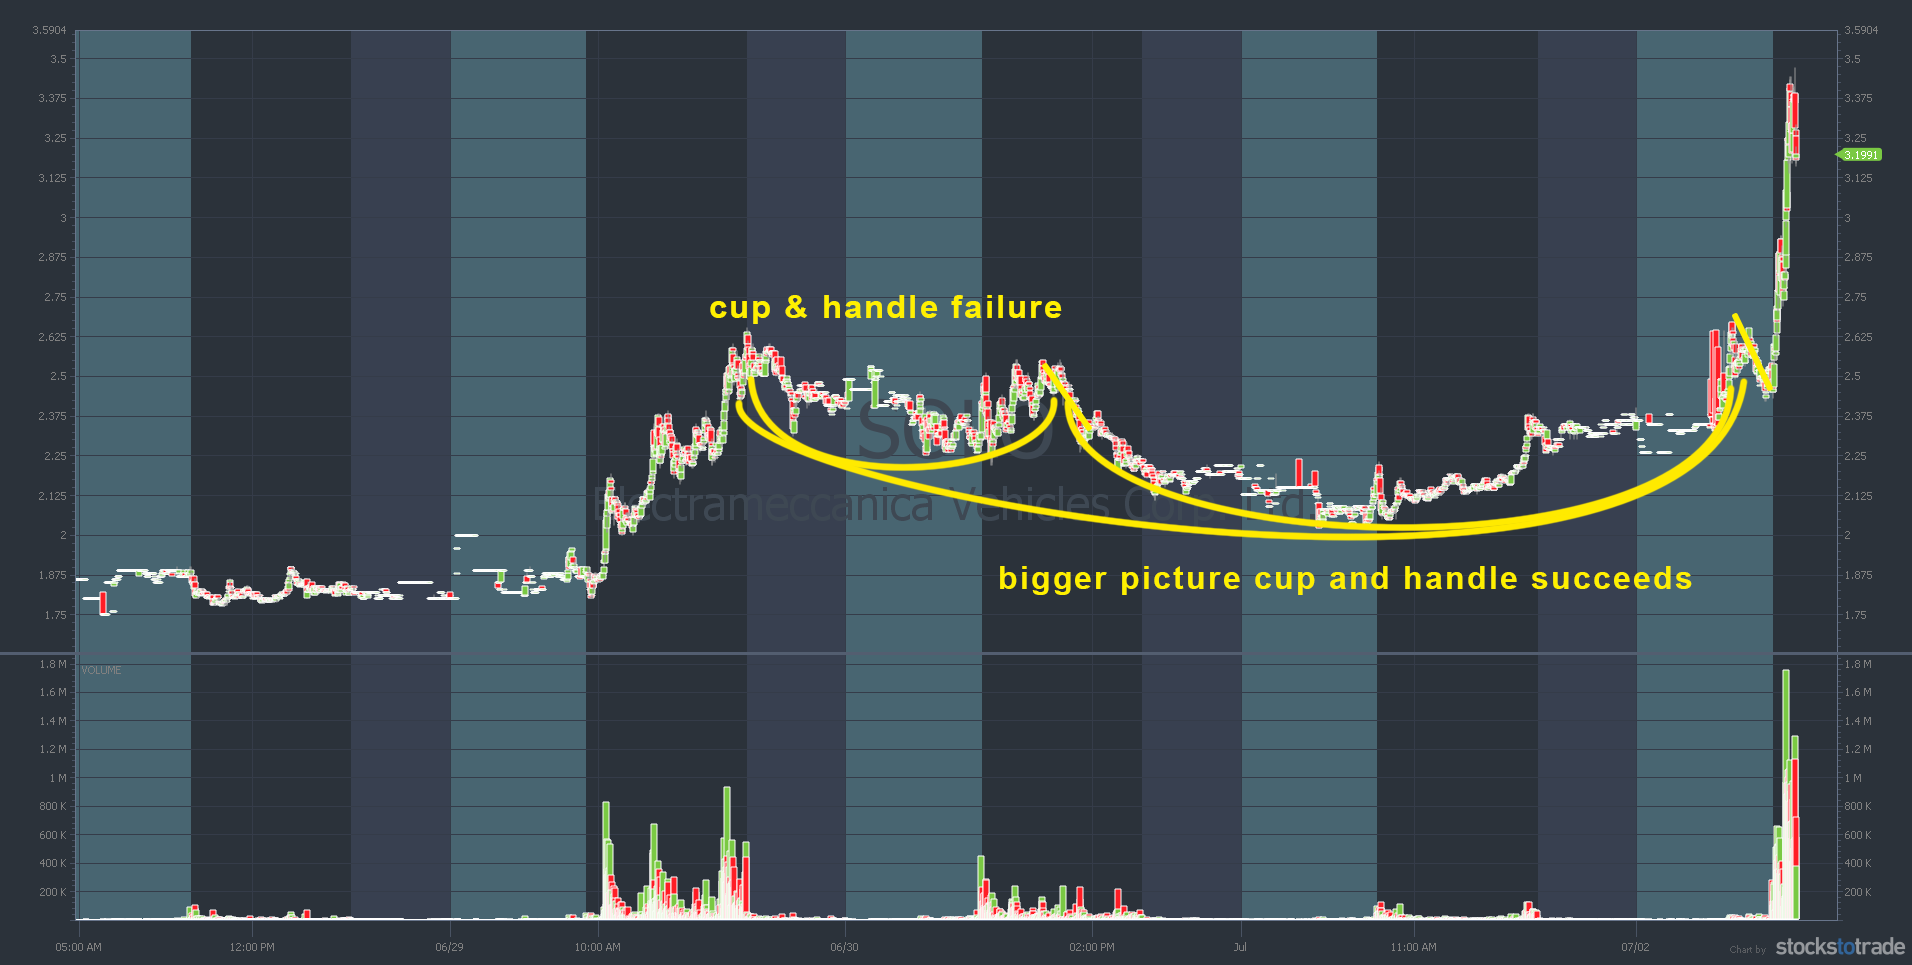 Cup with Handle [ChartSchool]